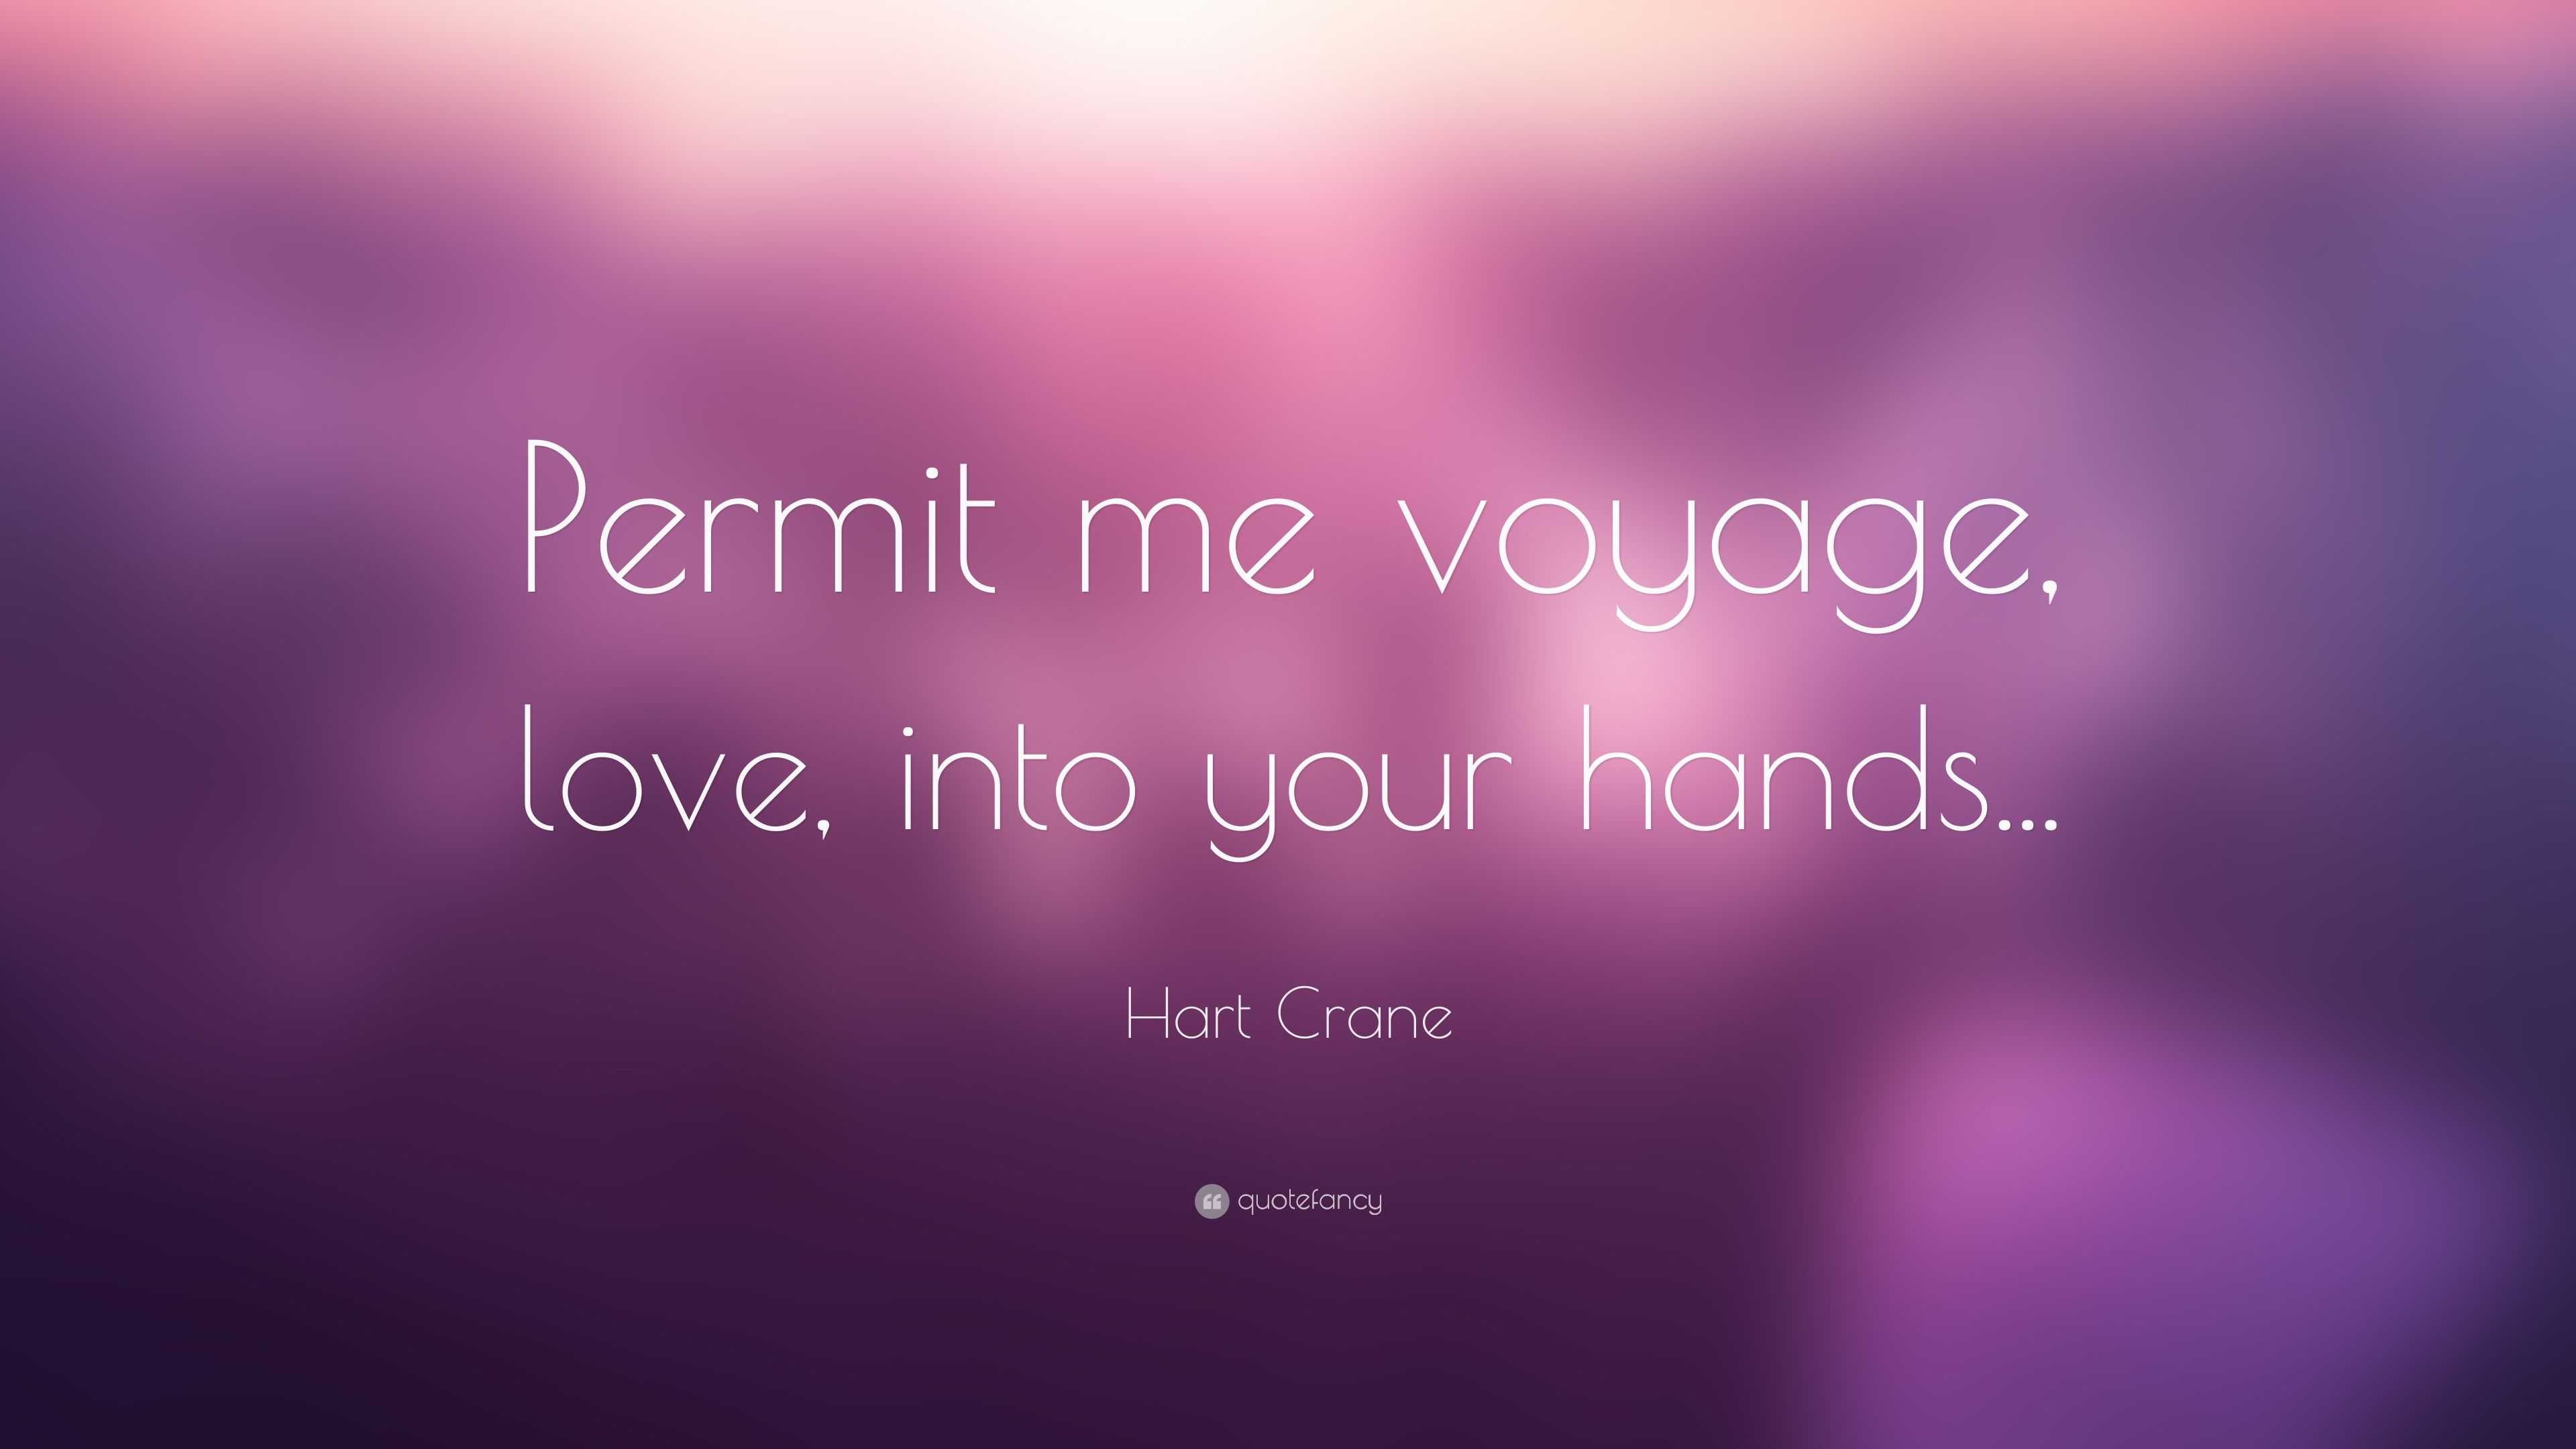 permit me voyage meaning